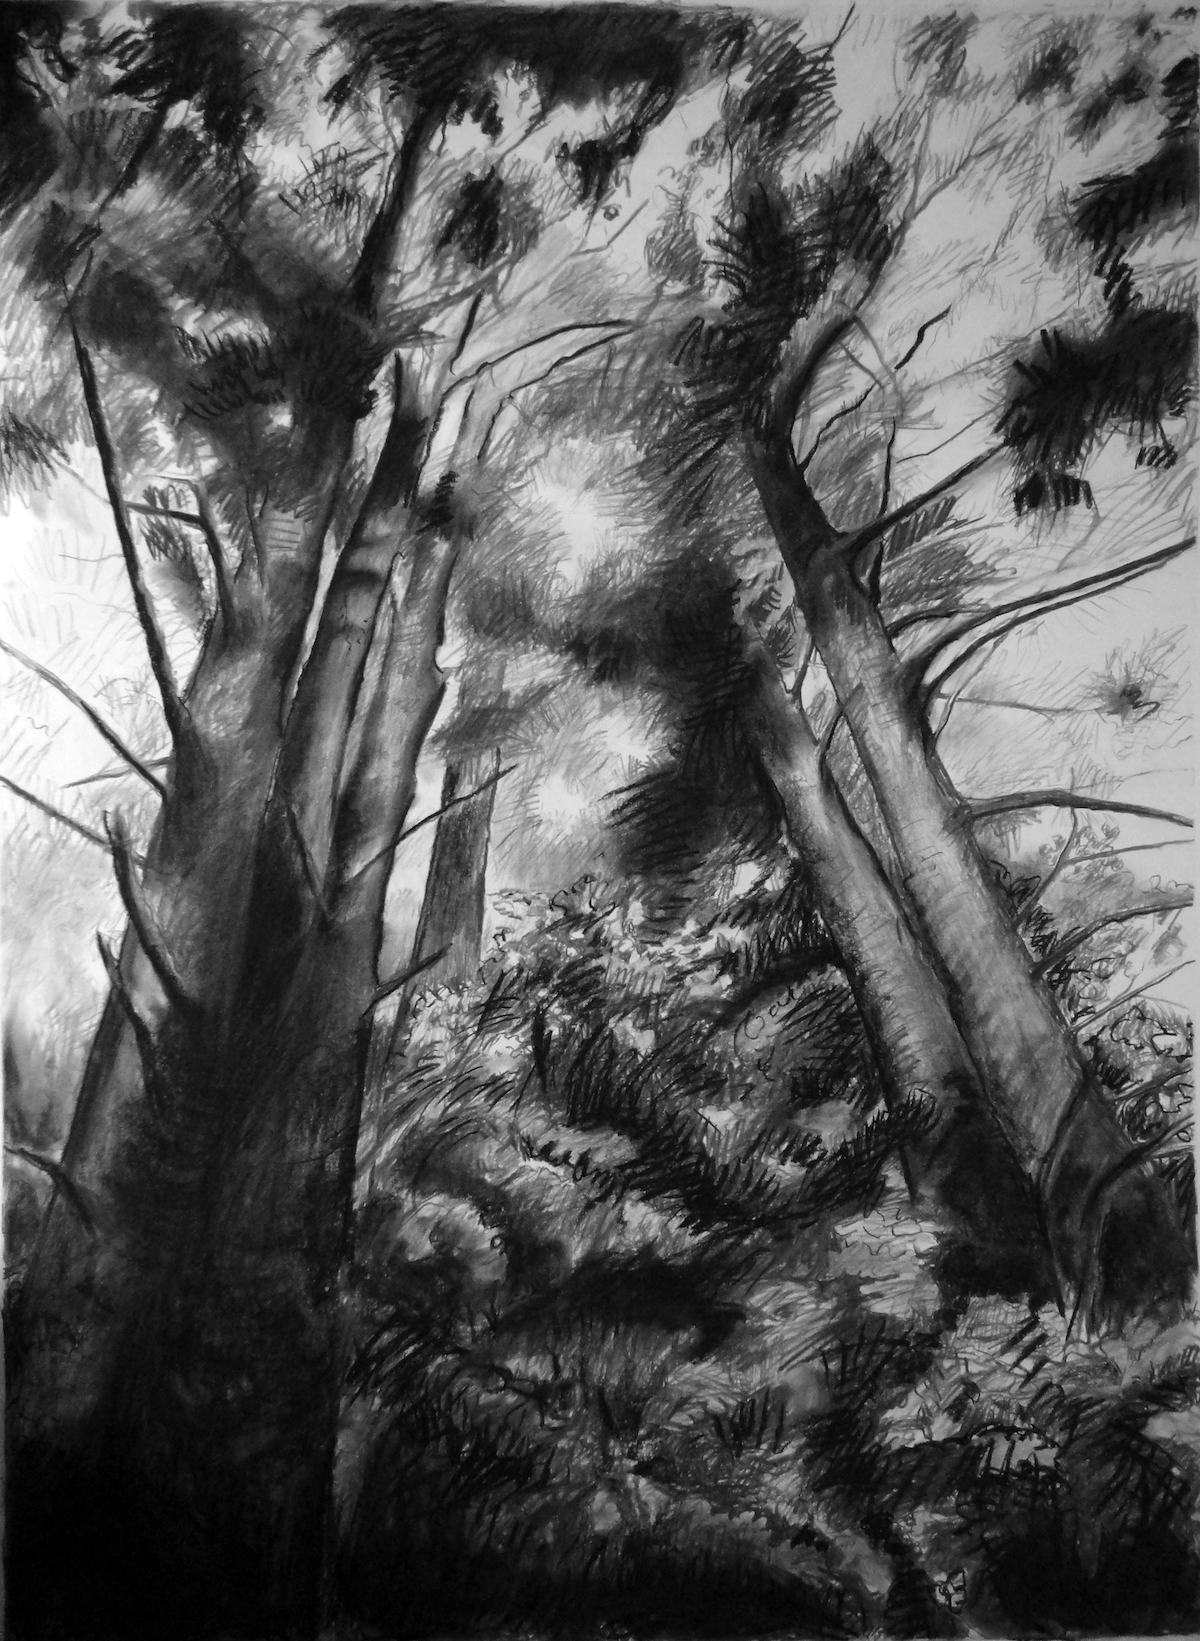 For Pam, charcoal drawing by Linda Knaack